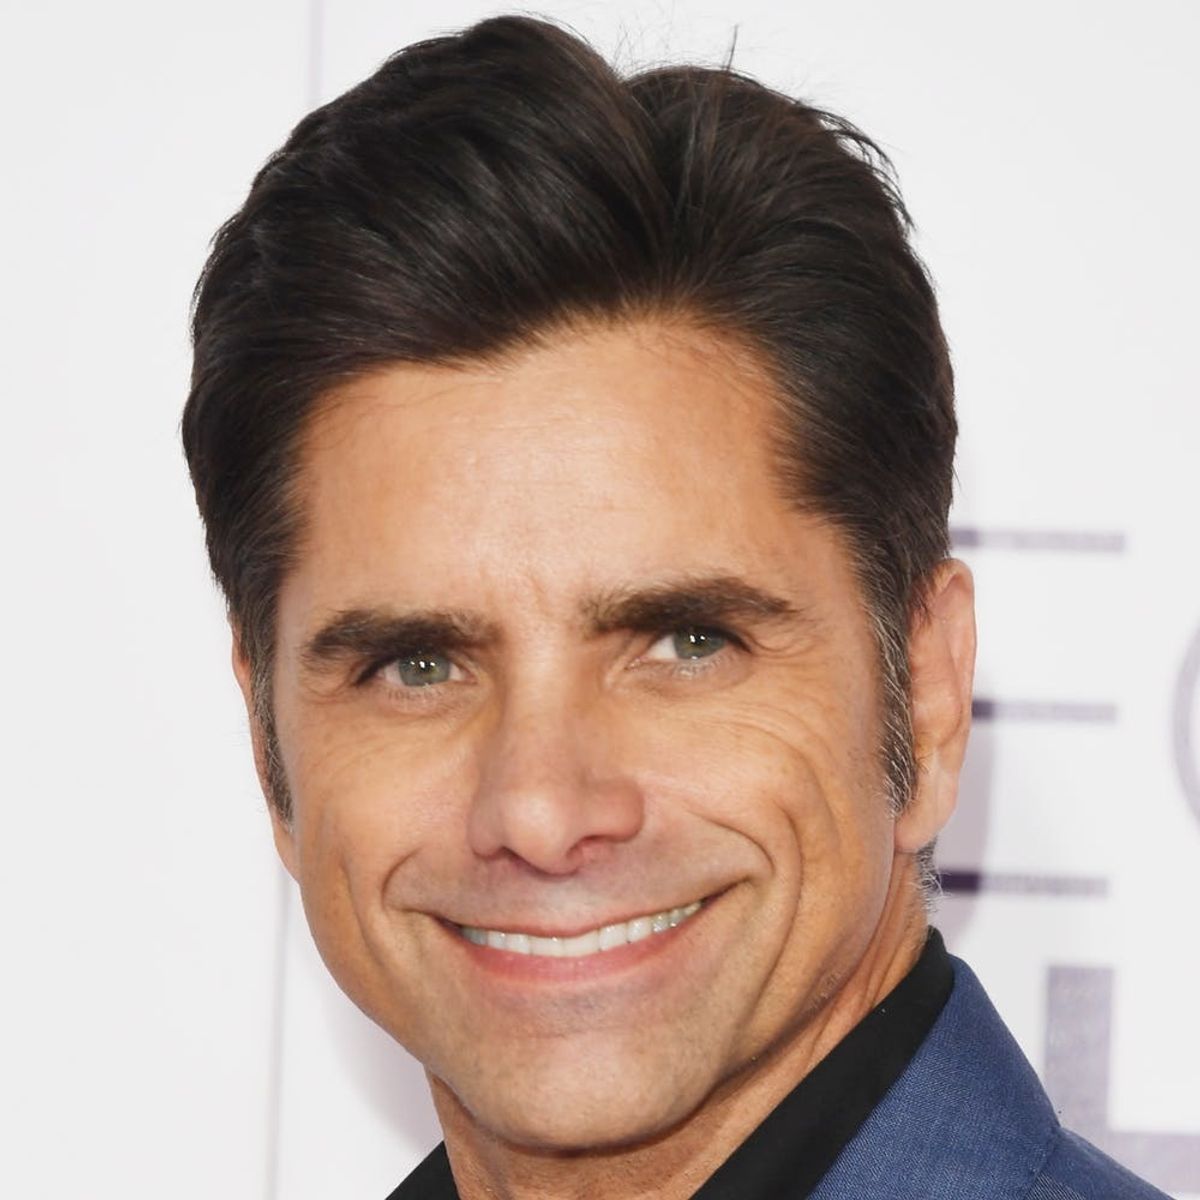 John Stamos Ran into Ashton Kutcher While Grocery Shopping for Pasta and It Was Instagram Gold